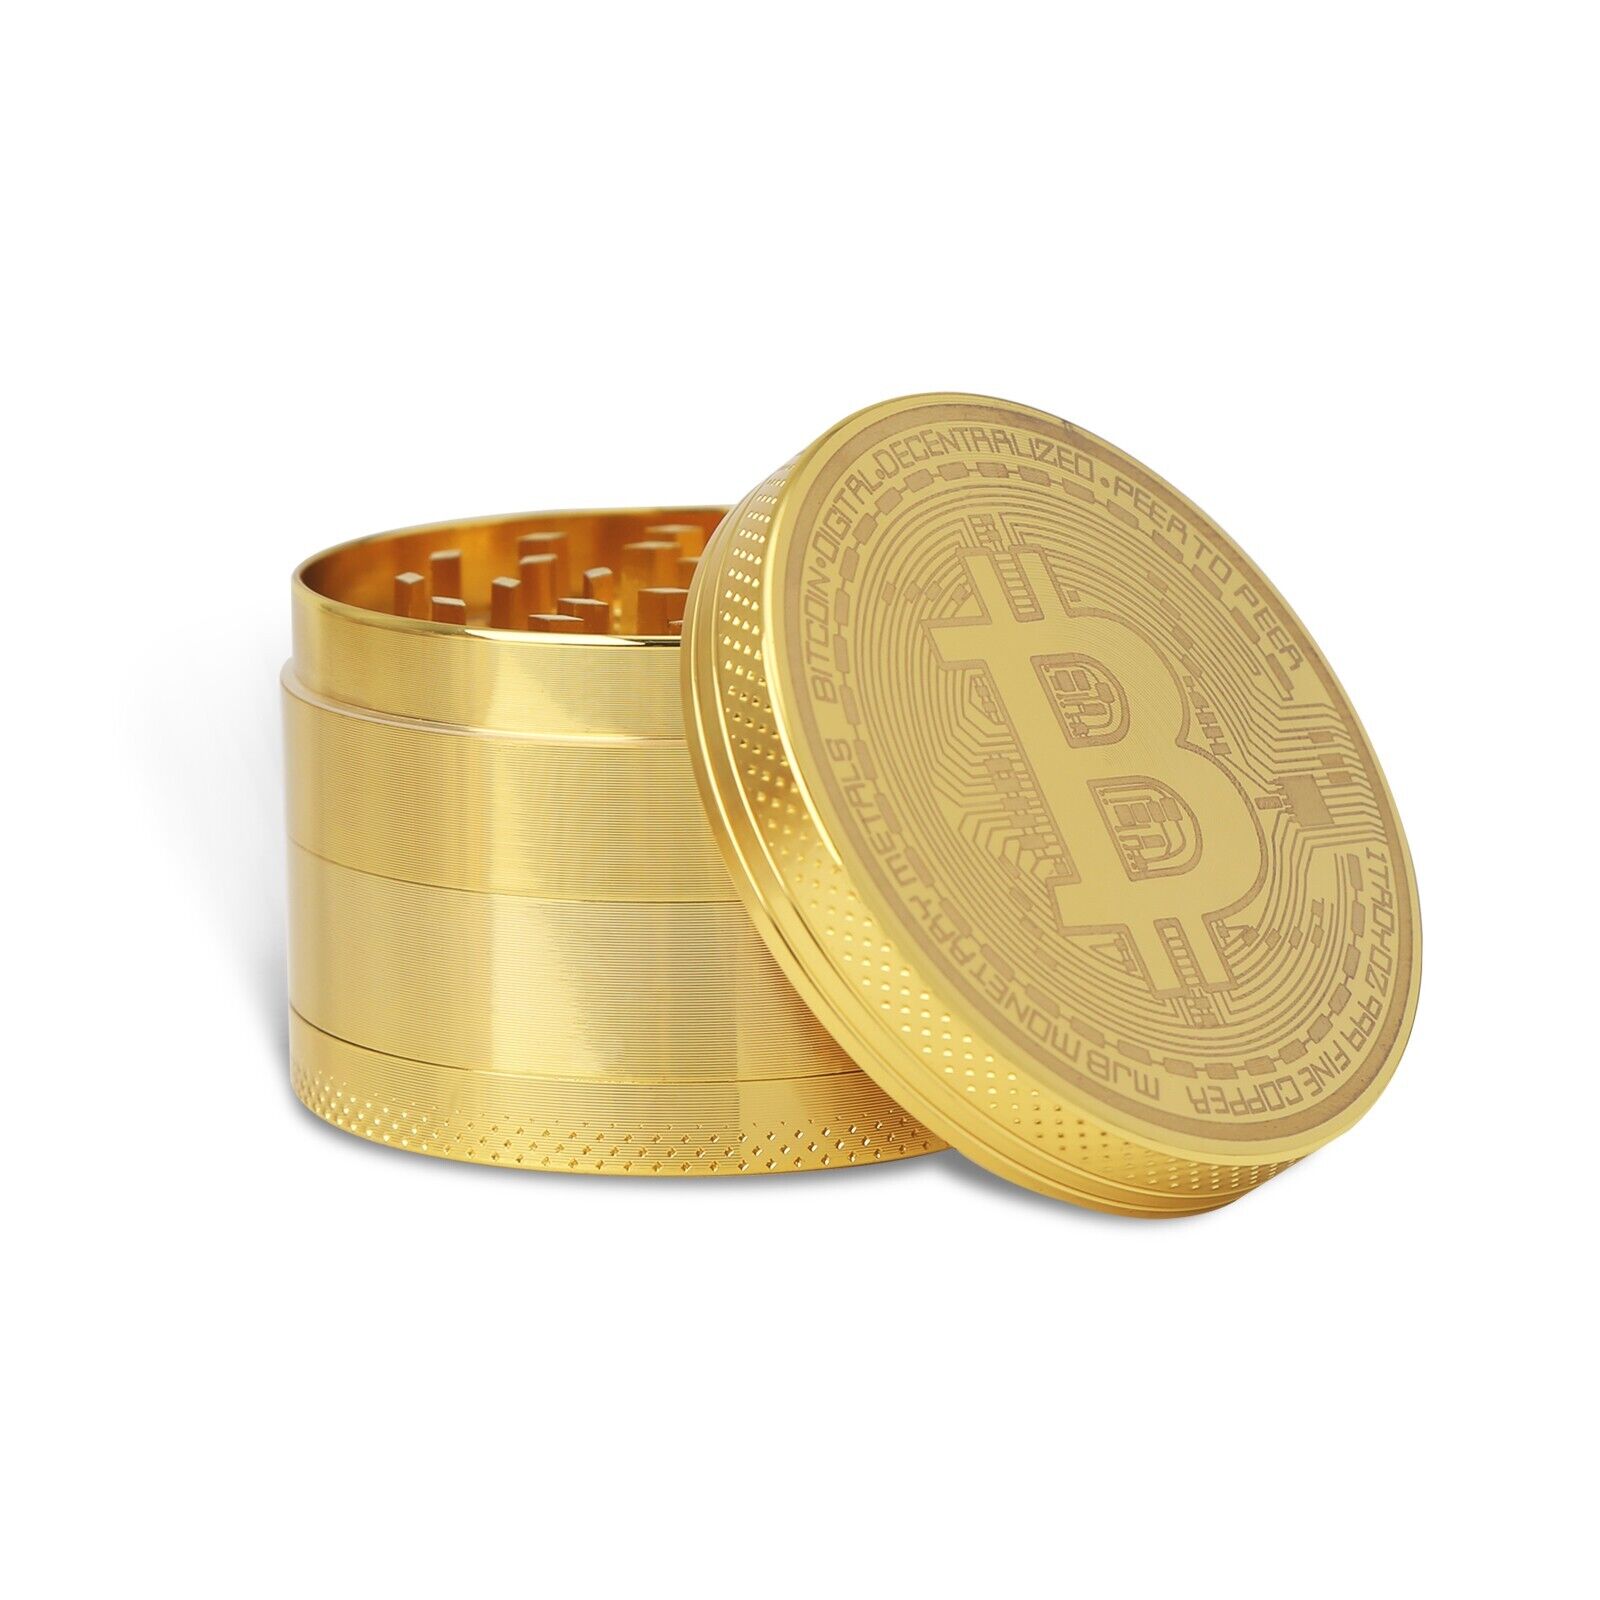 2.5 Inches 4 Piece Collectable Crypto Currency Bitcoin Dry Spice Herb Grinder